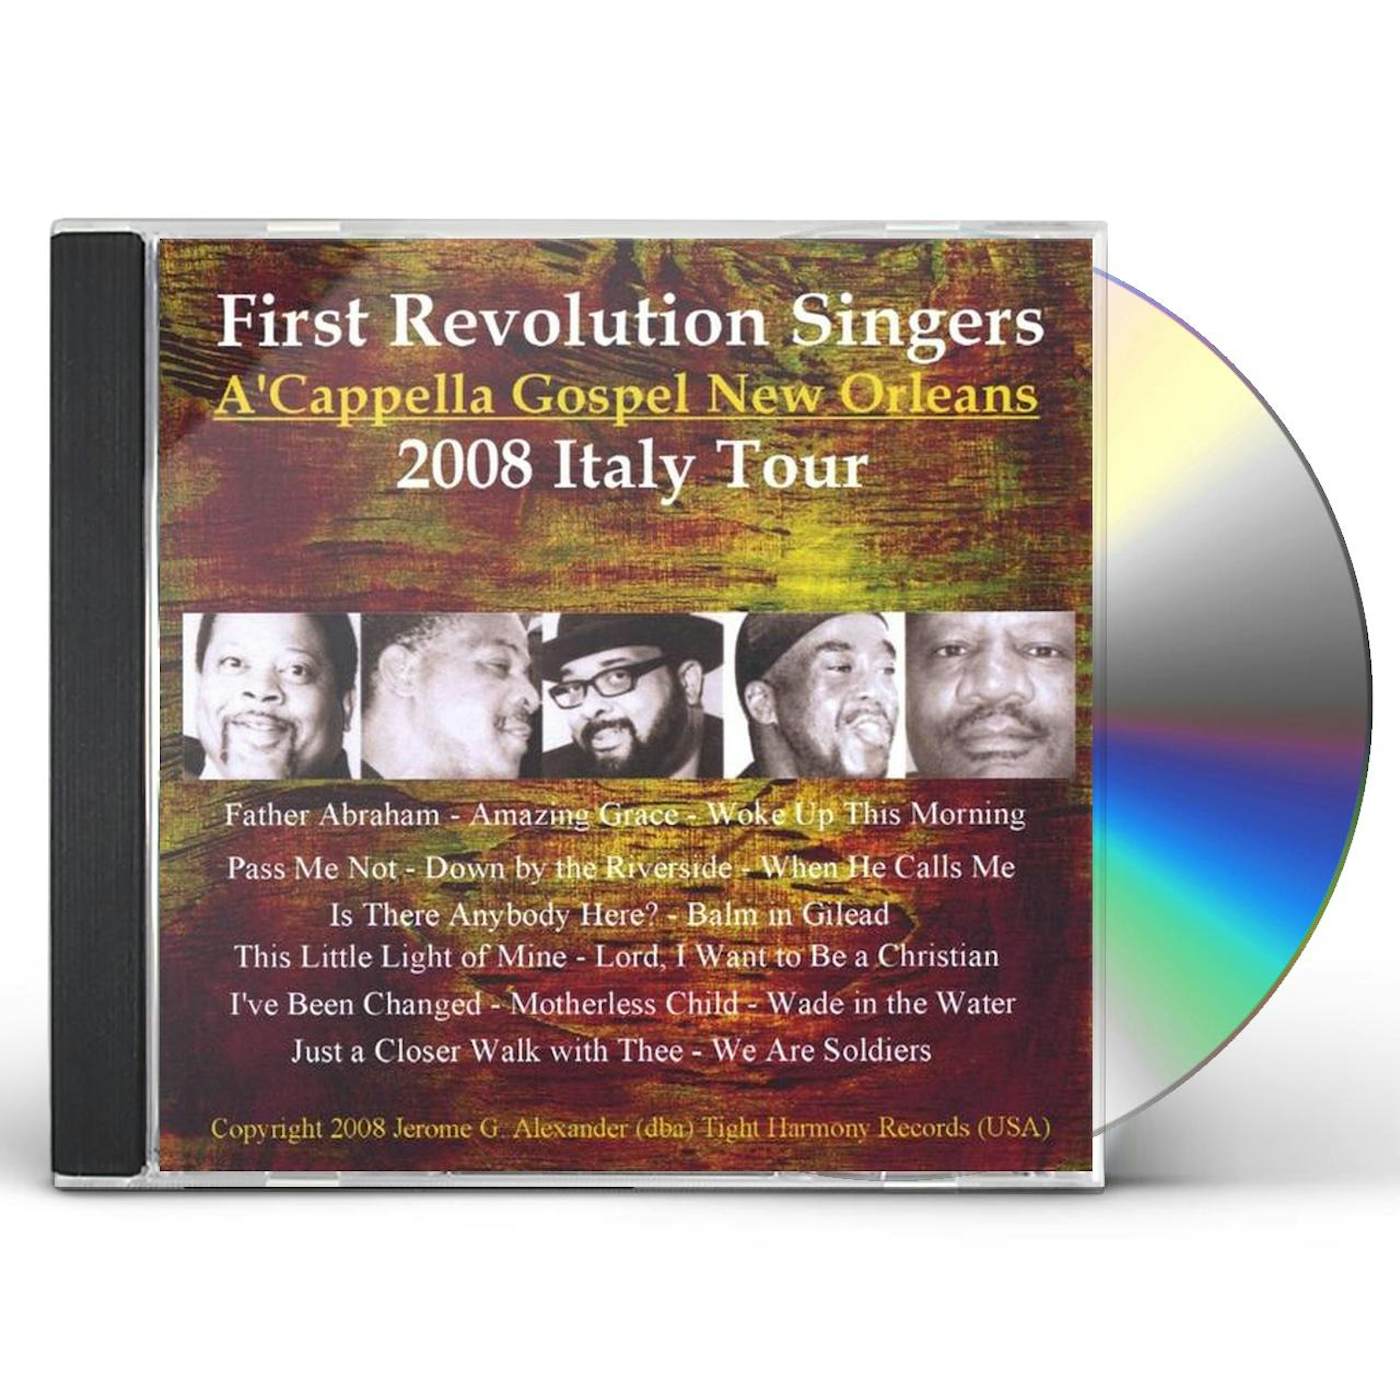 First Revolution Singers 2008 ITALY TOUR CD